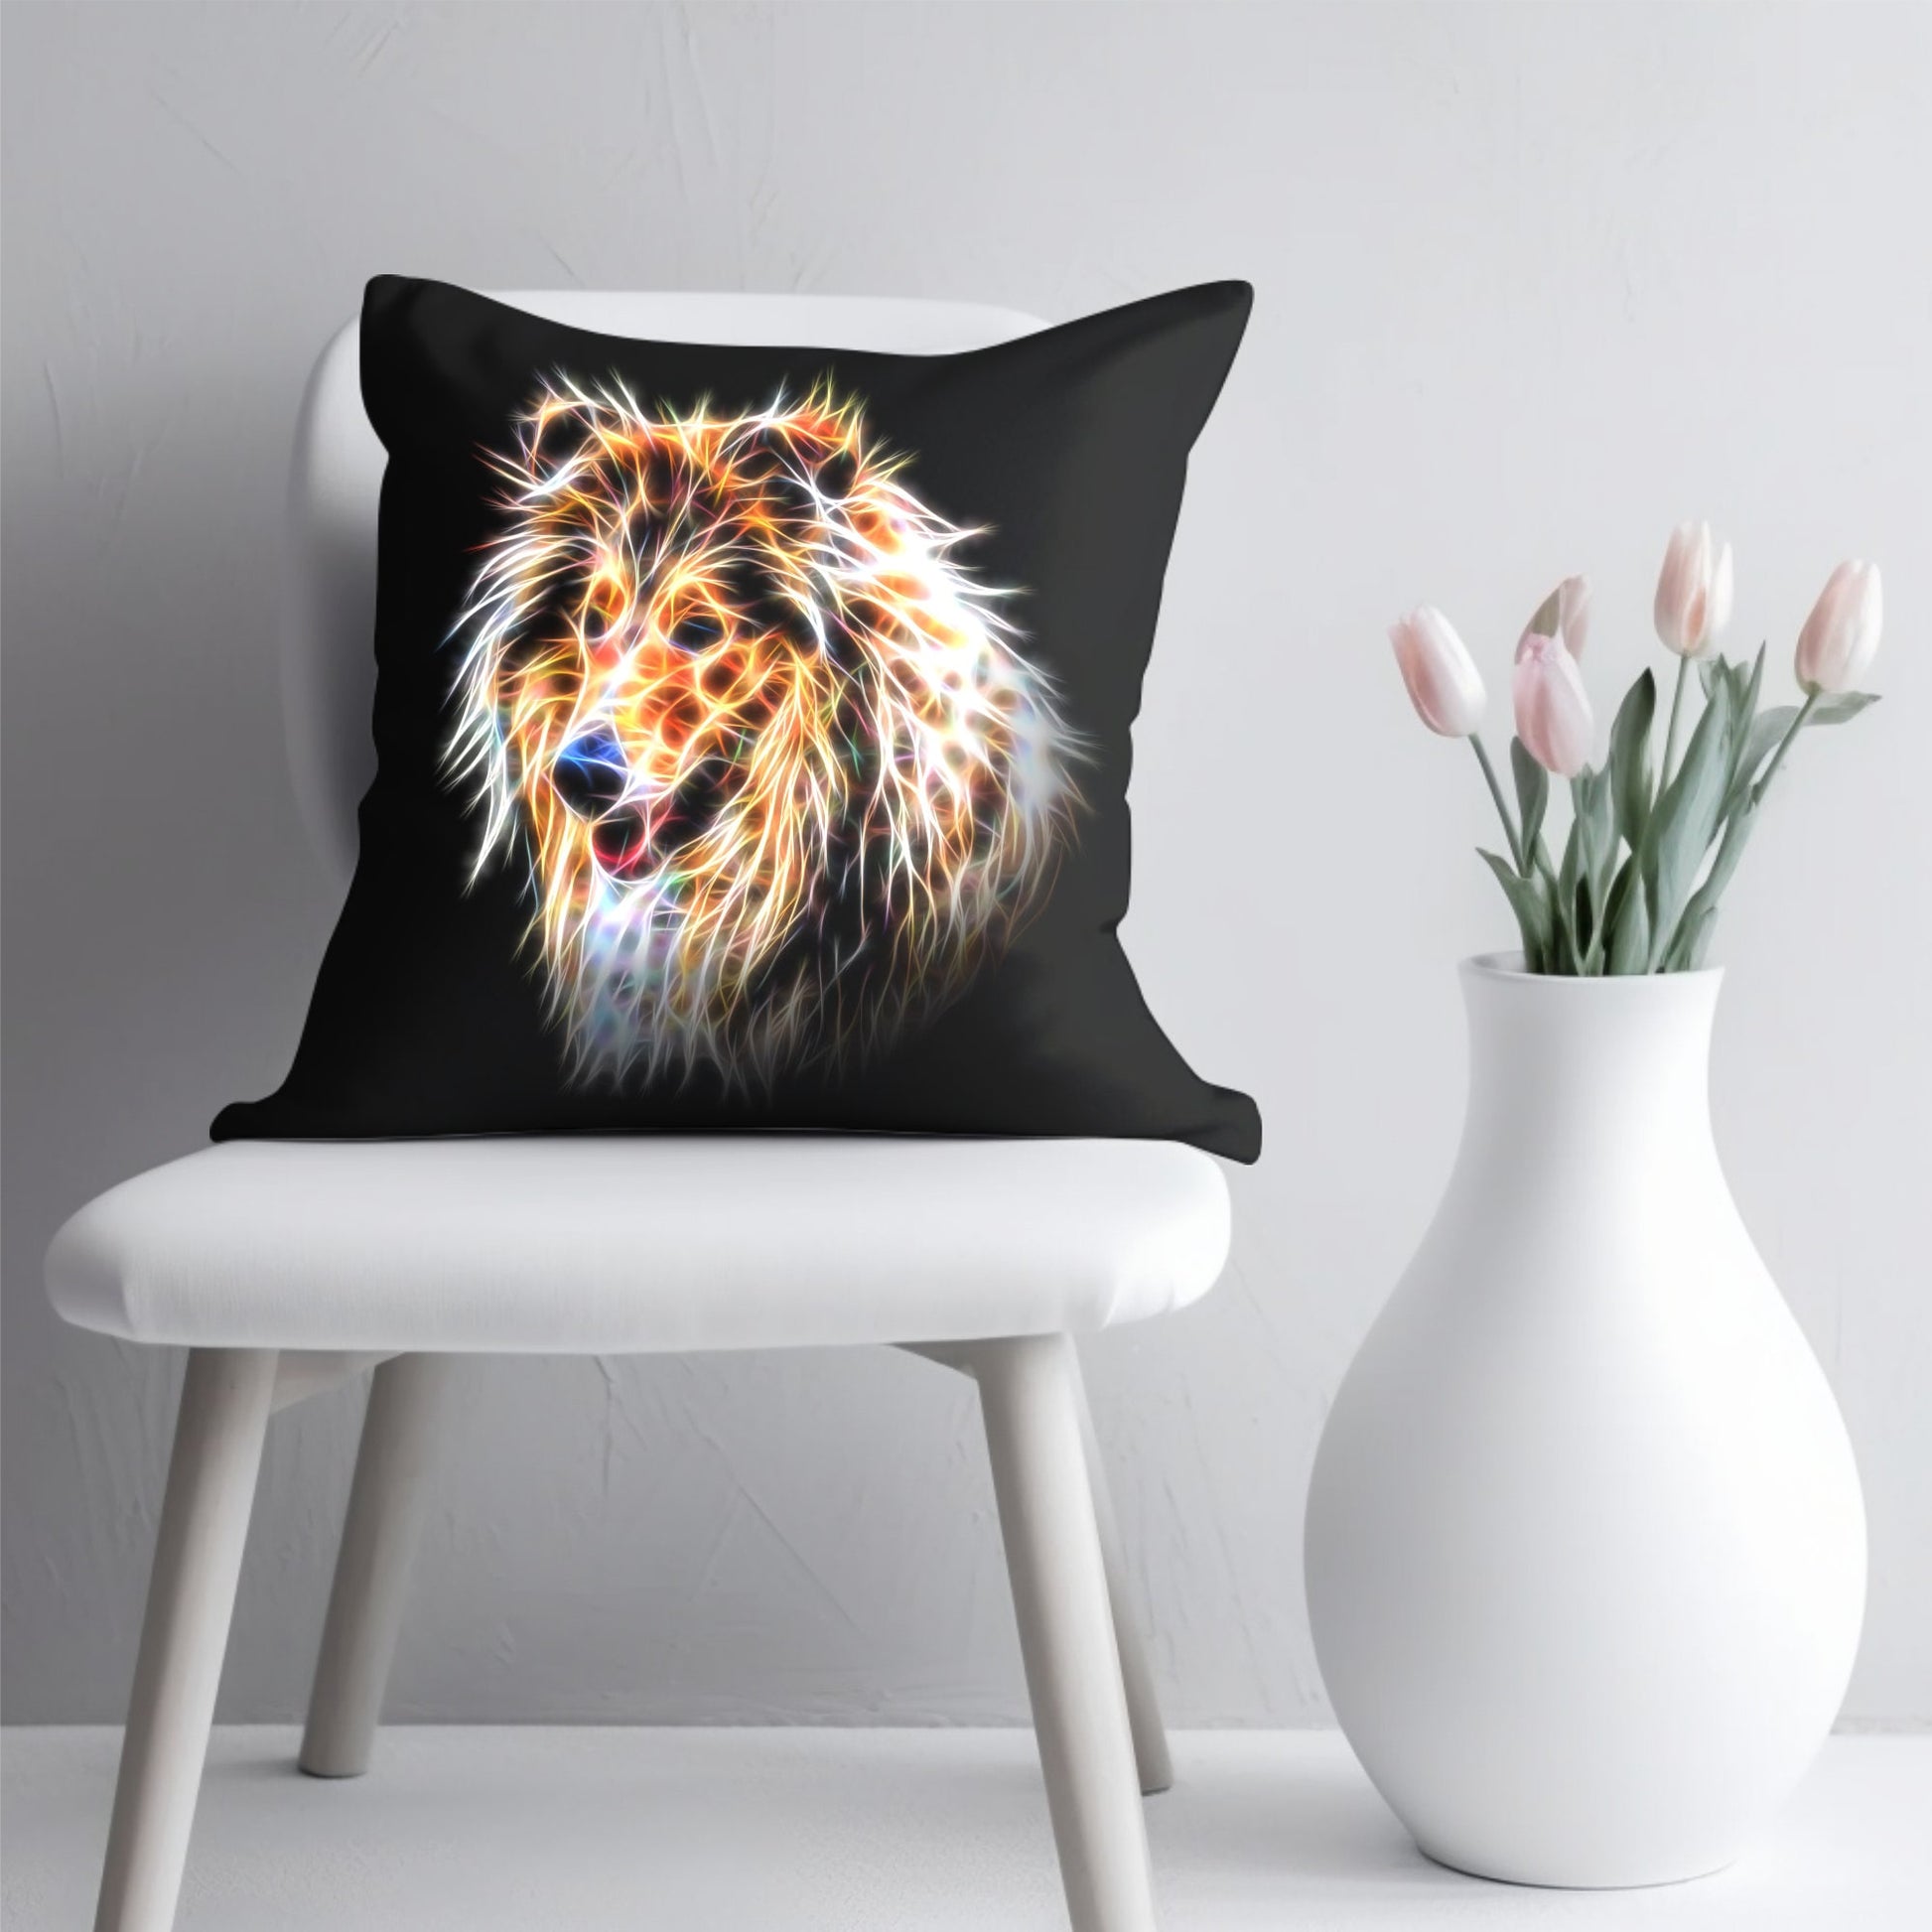 Rough Collie Cushion and Insert with Stunning Fractal Art Design